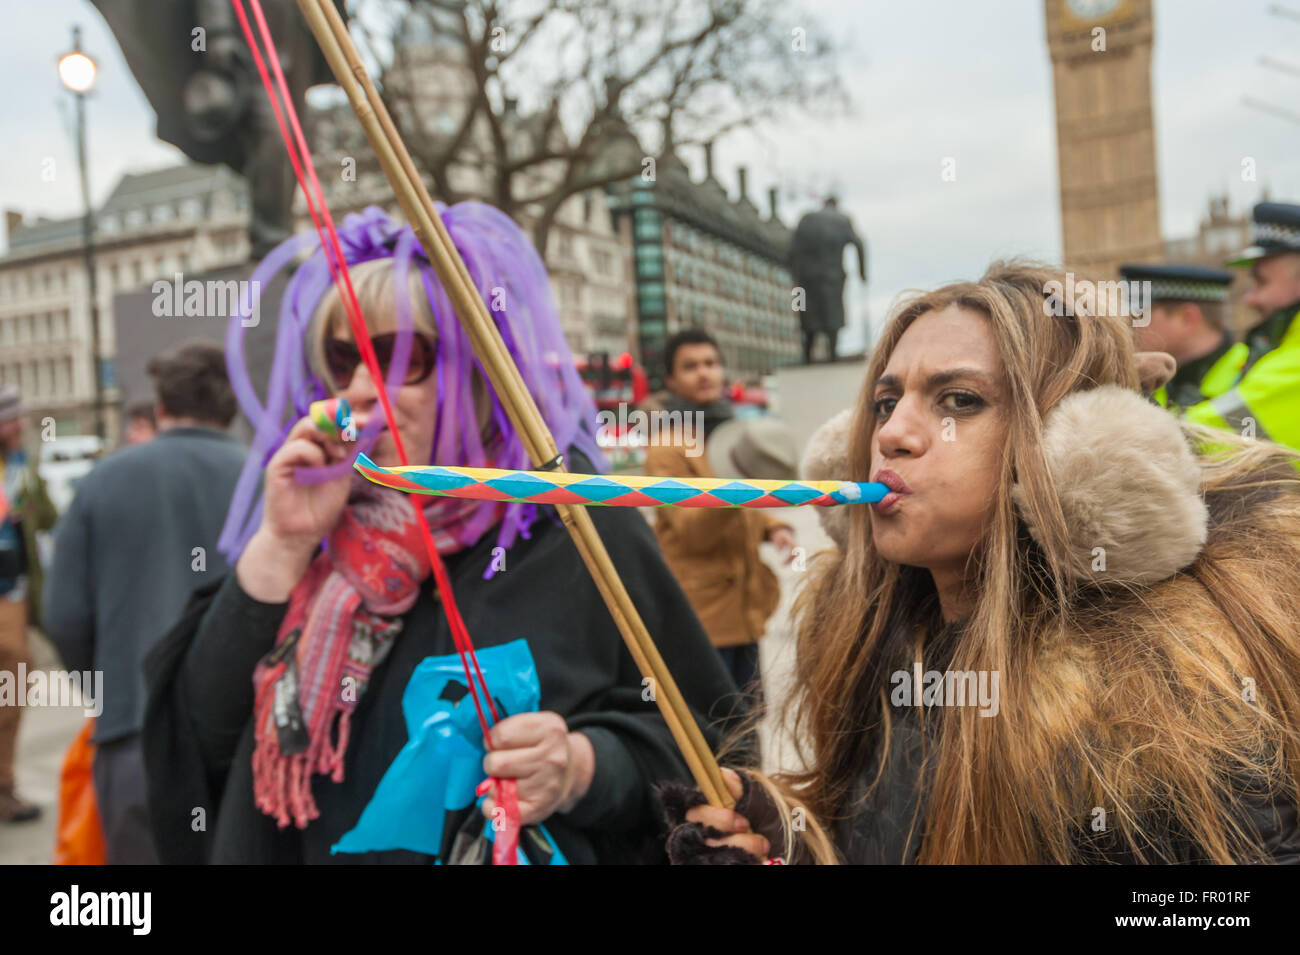 London, UK. 19th March, 2016. Women blow out party squakers as Disabled People Against Cuts (DPAC) celebrate the resignation of Iain Duncan Smith, one of the chief architects of the brutal Tory welfare policy that has caused them so much suffering and harm, with a party in front of the Houses of Parliament in Parliament Square. . Peter Marshall/Alamy Live News Stock Photo